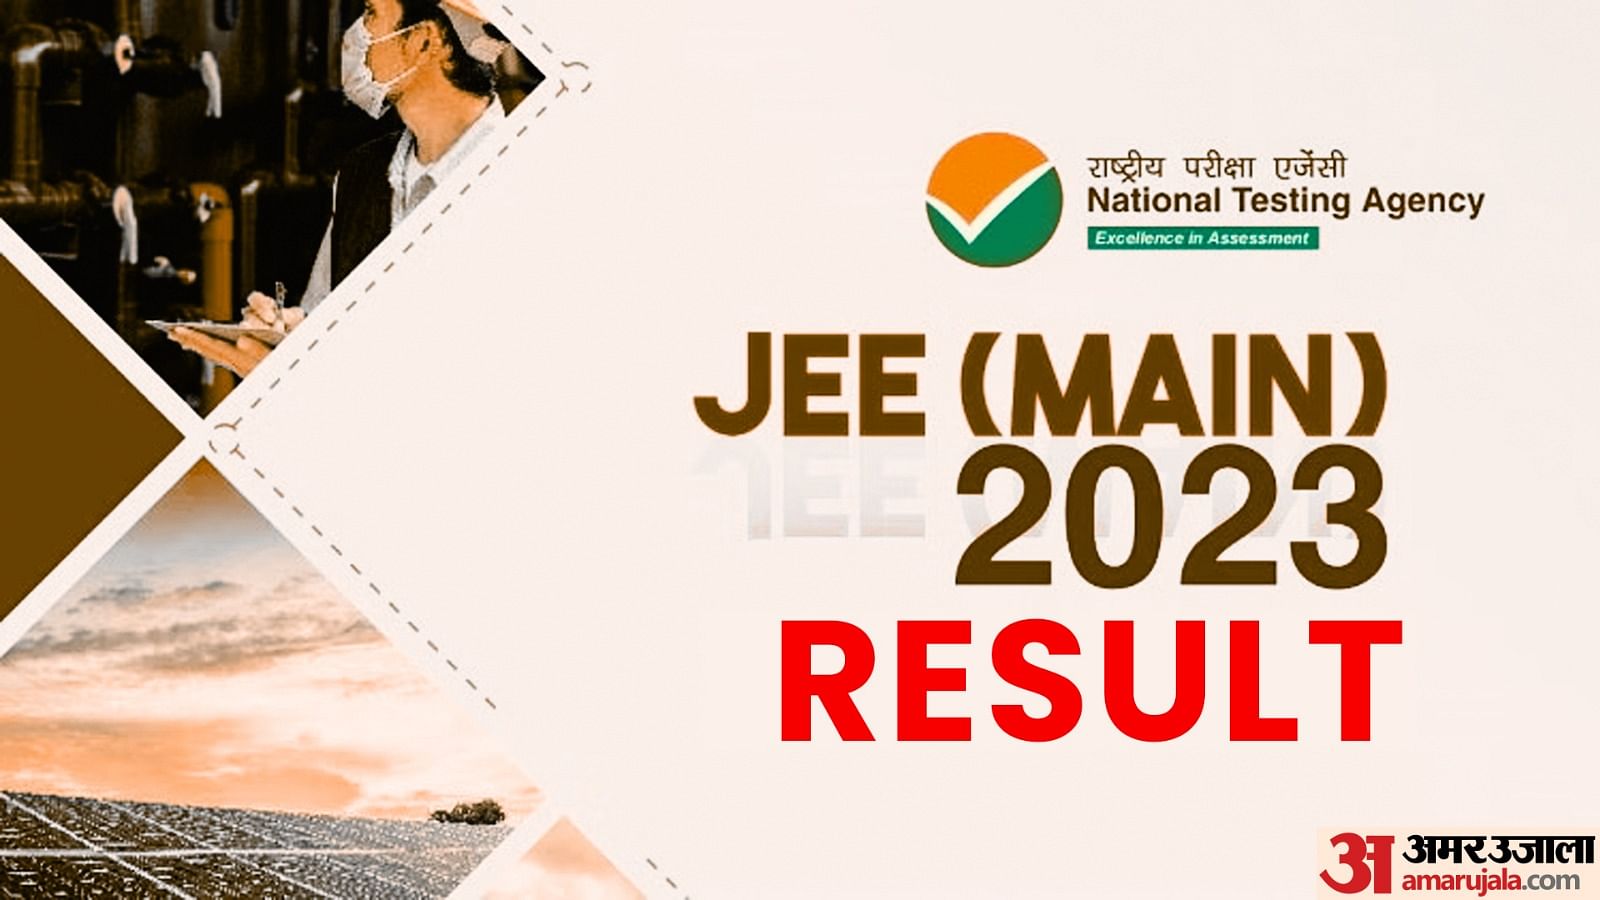 Jee Main Result 2023 Releasing Soon Which Nit Will You Get At How Many